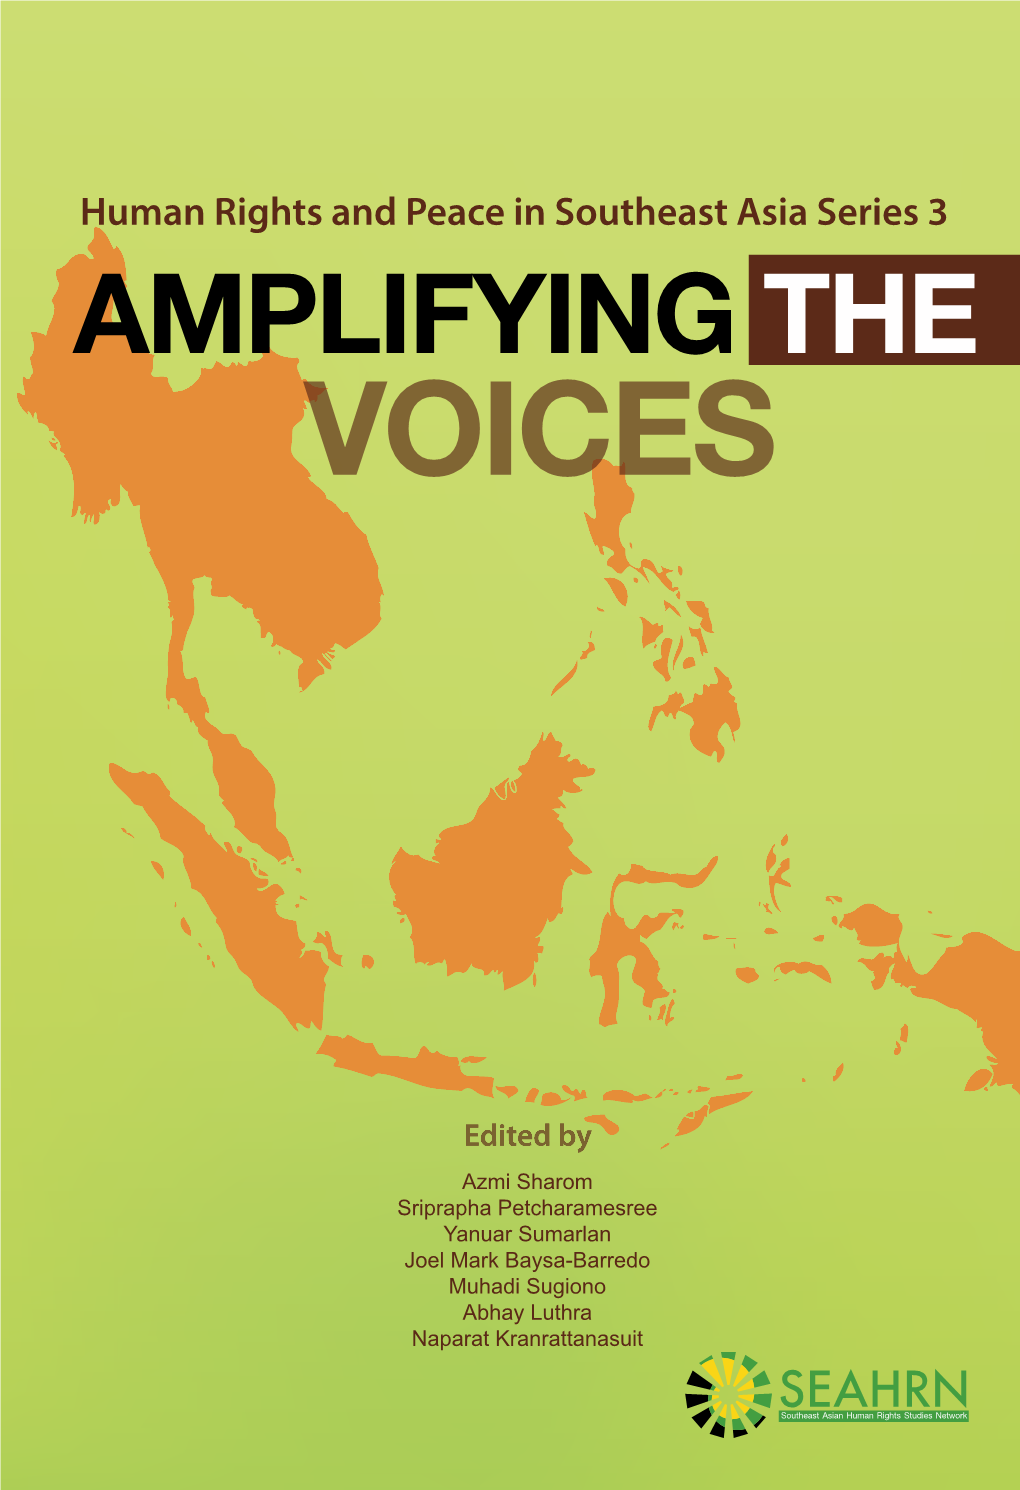 Voices” Attempts to Capture Relevant Human Rights and Peace in Southeast Asia Series 3 Issues That Mirror Certain Aspects in the Lives of Southeast Asians